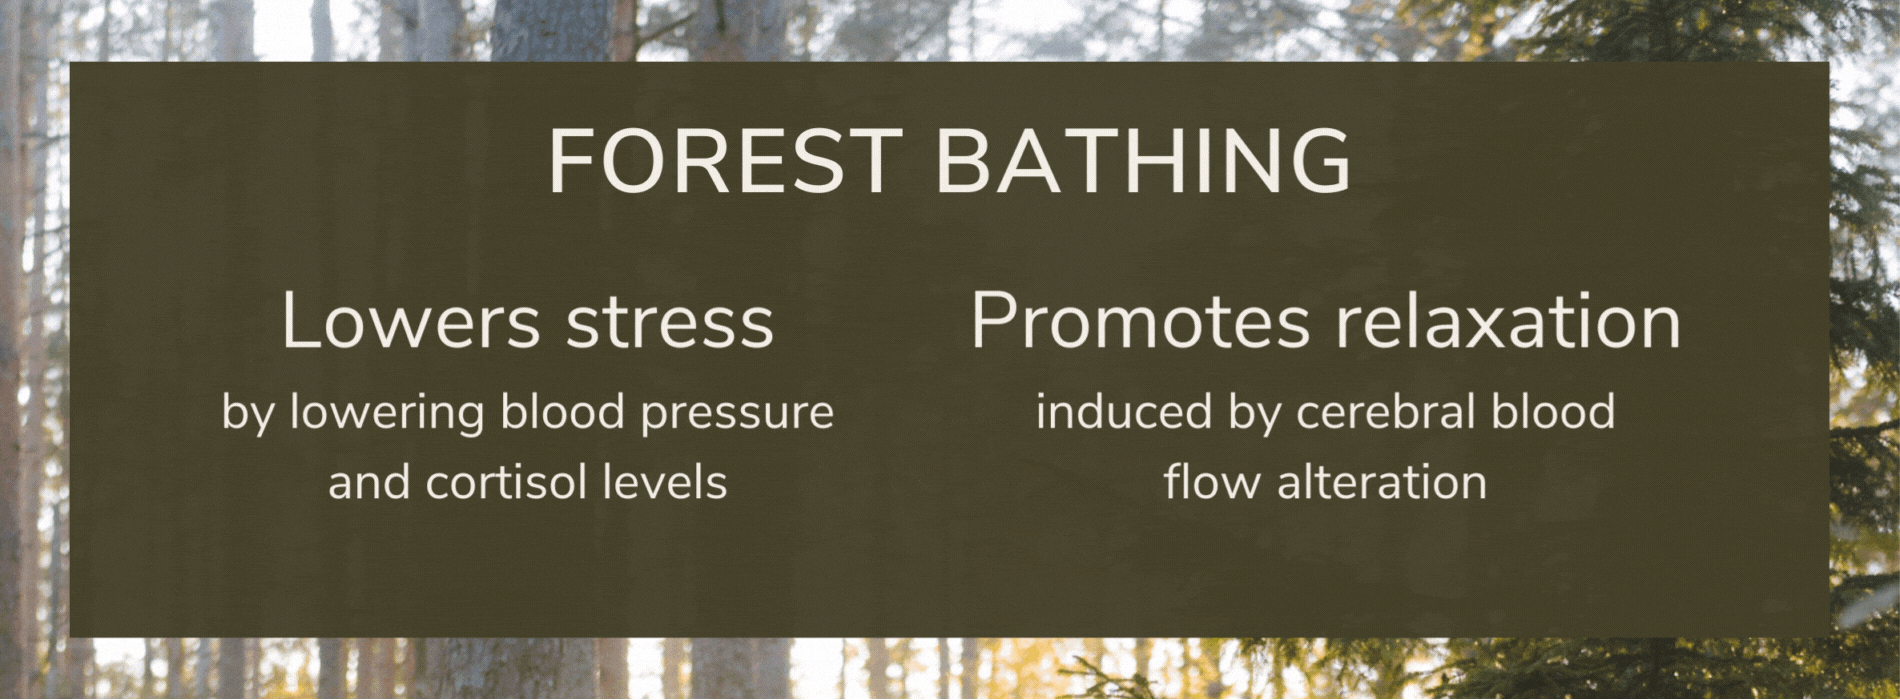 Forest Bathing: Lowers stress by lowering blood pressure and cortisol levels, Promotes relaxation  induced by cerebral blood  flow alteration& 